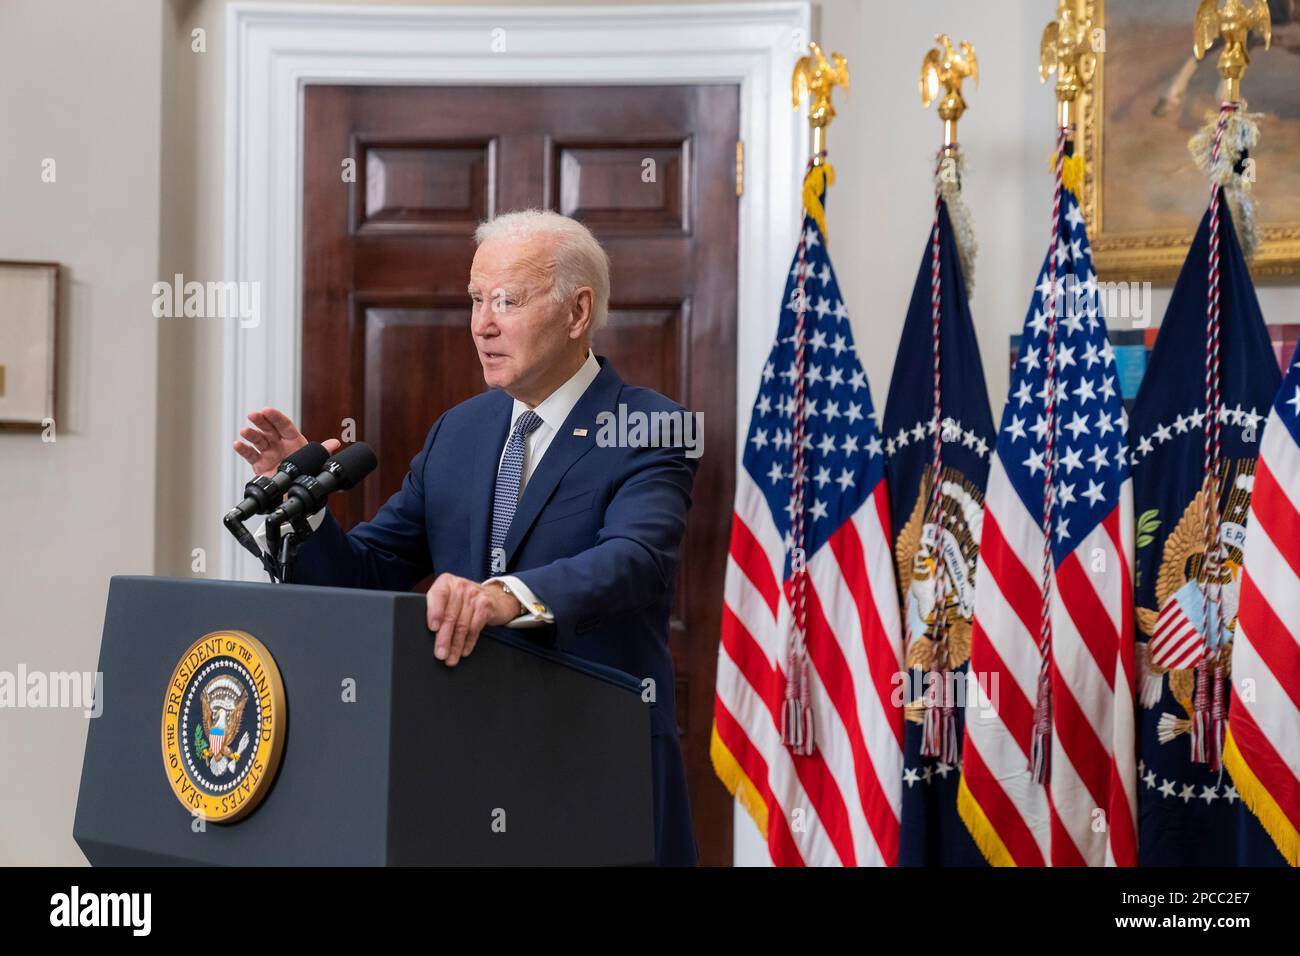 Washington, United States Of America. 13th Mar, 2023. Washington, United States of America. 13 March, 2023. U.S President Joe Biden delivers remarks on the banking system and his decision to bailout Silicon Valley Bank in the Roosevelt Room of the White House, March 13, 2023 in Washington, DC The government moved to bailout SVB and Signature Bank to steady the banking system and restore confidence. Credit: Adam Schultz/White House Photo/Alamy Live News Stock Photo